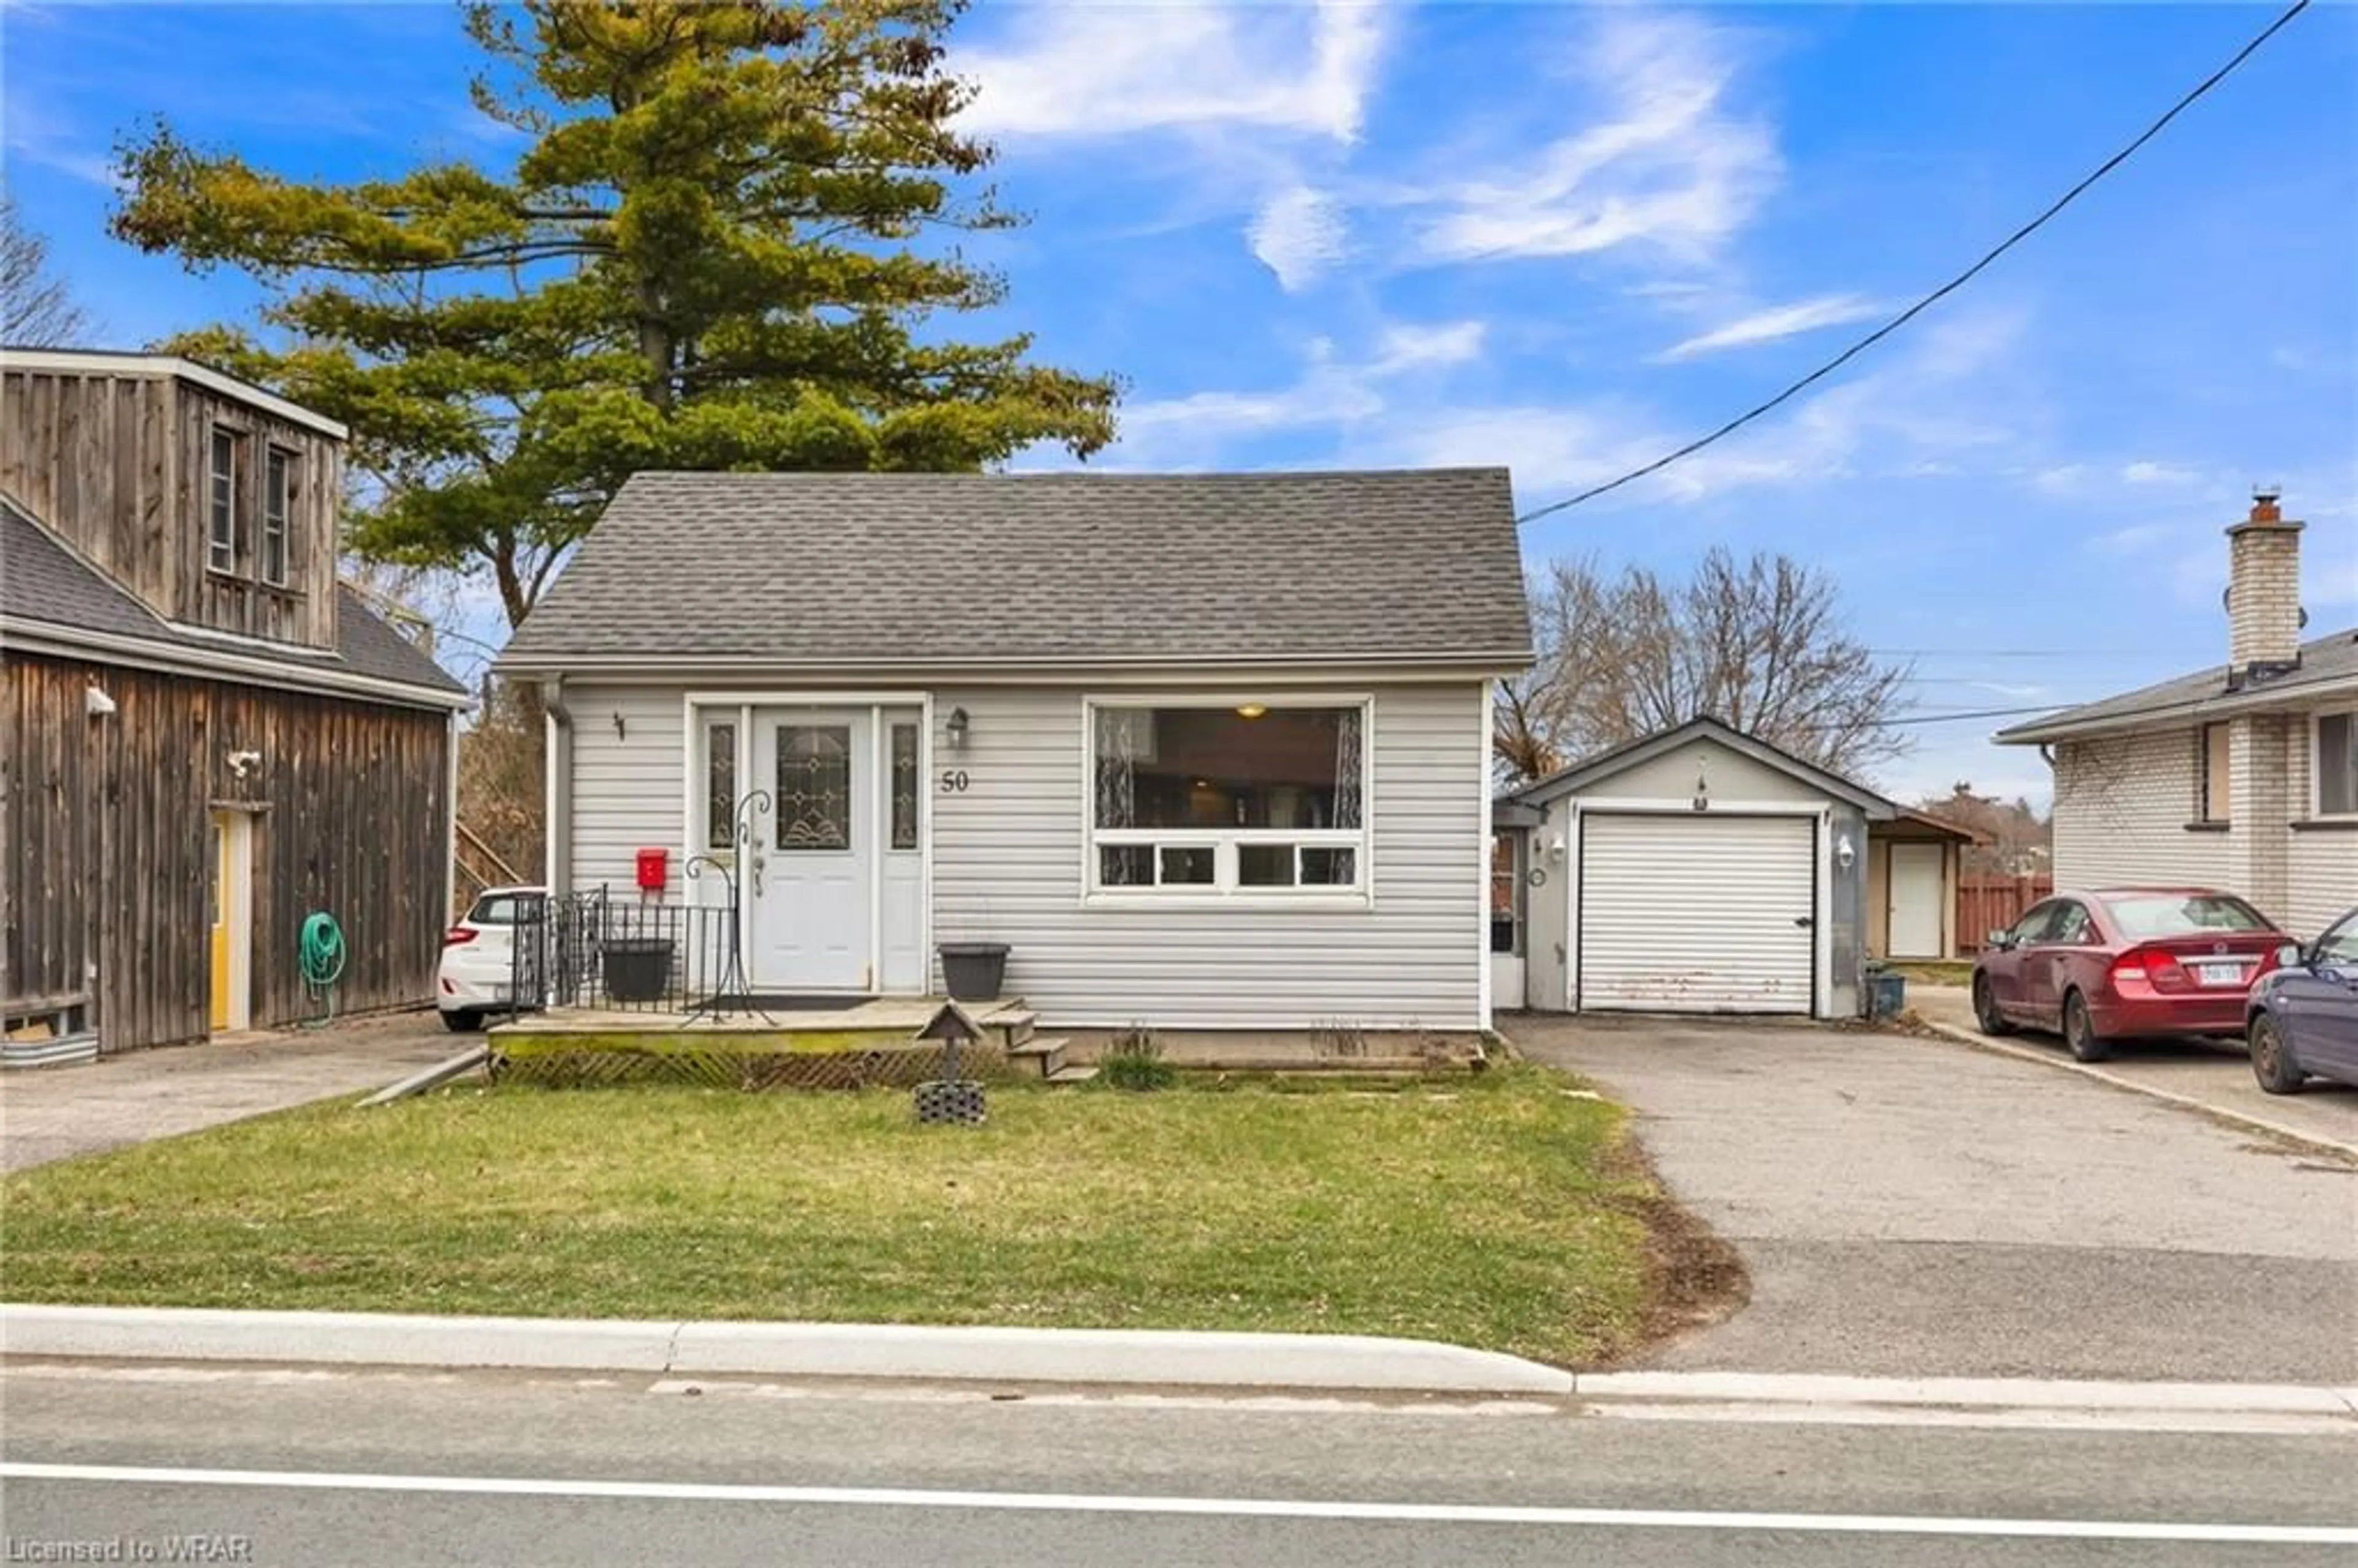 Frontside or backside of a home for 50 Avenue Rd, Cambridge Ontario N1R 1B9